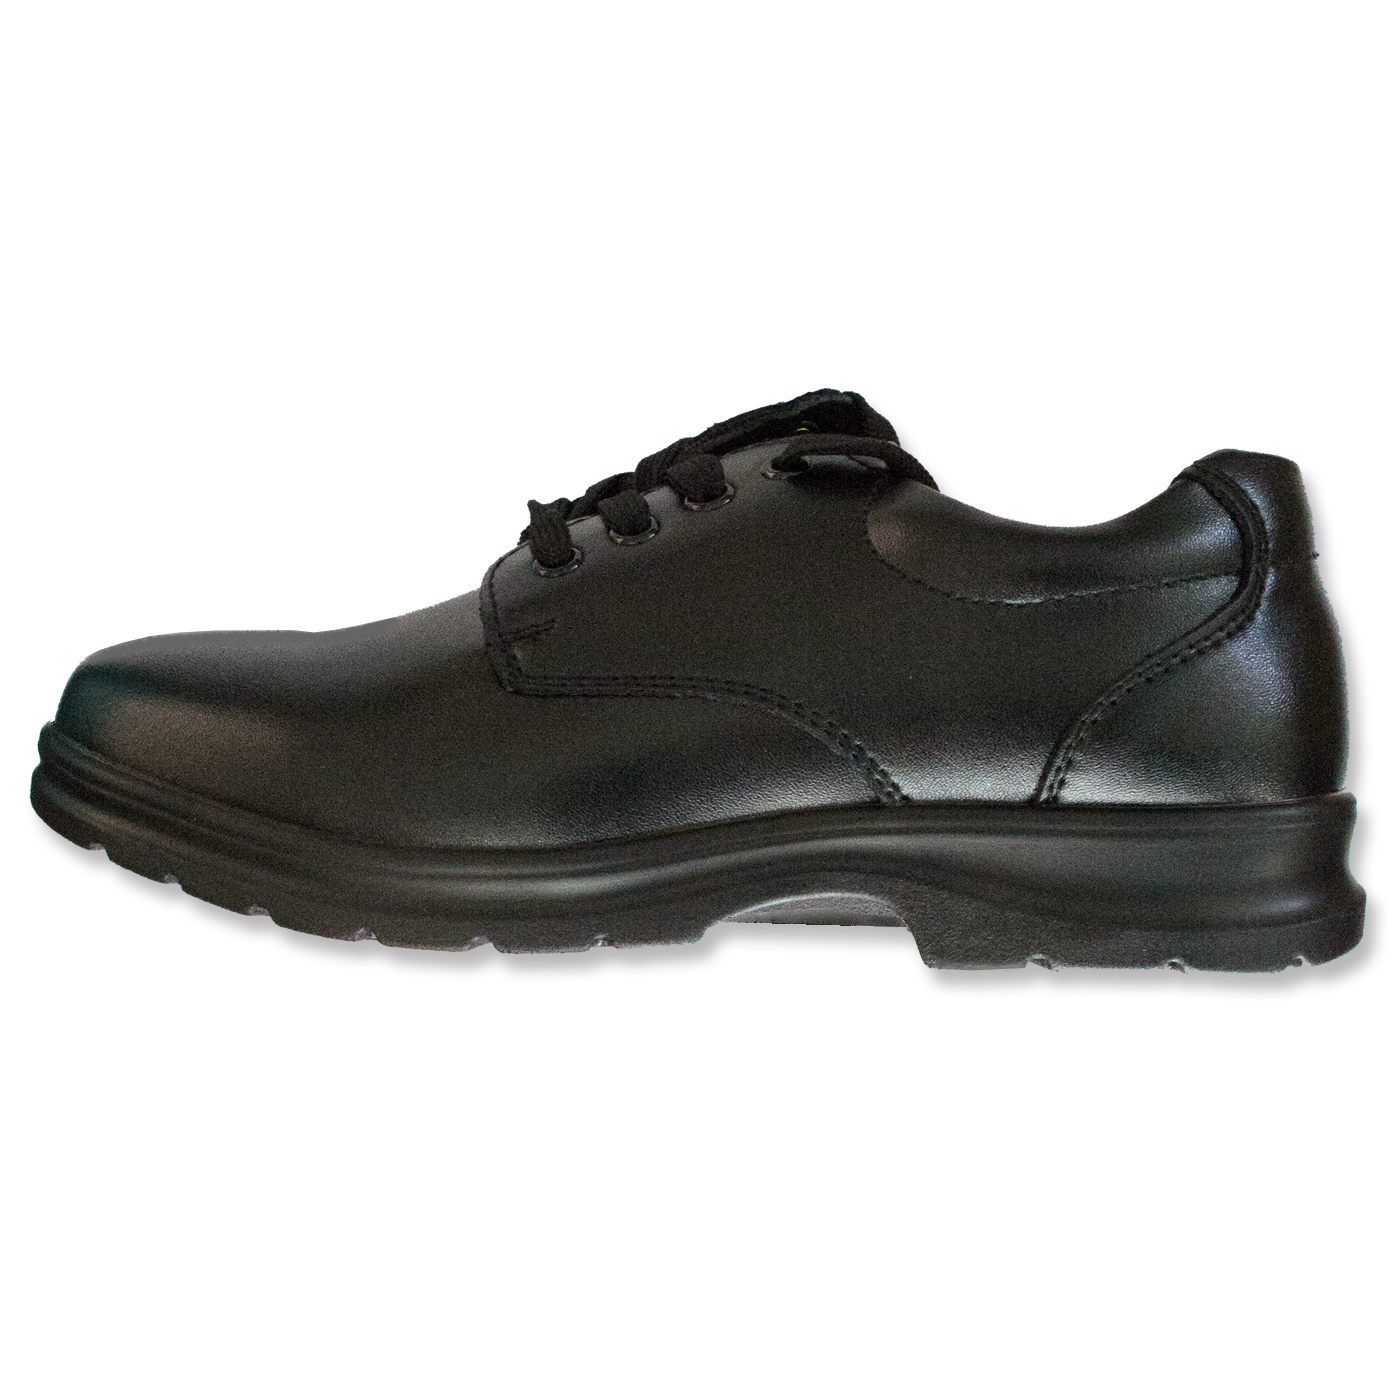 Grosby Lace Up Shoes for School Leather Black Educate JNR 2 UK Size 10-6